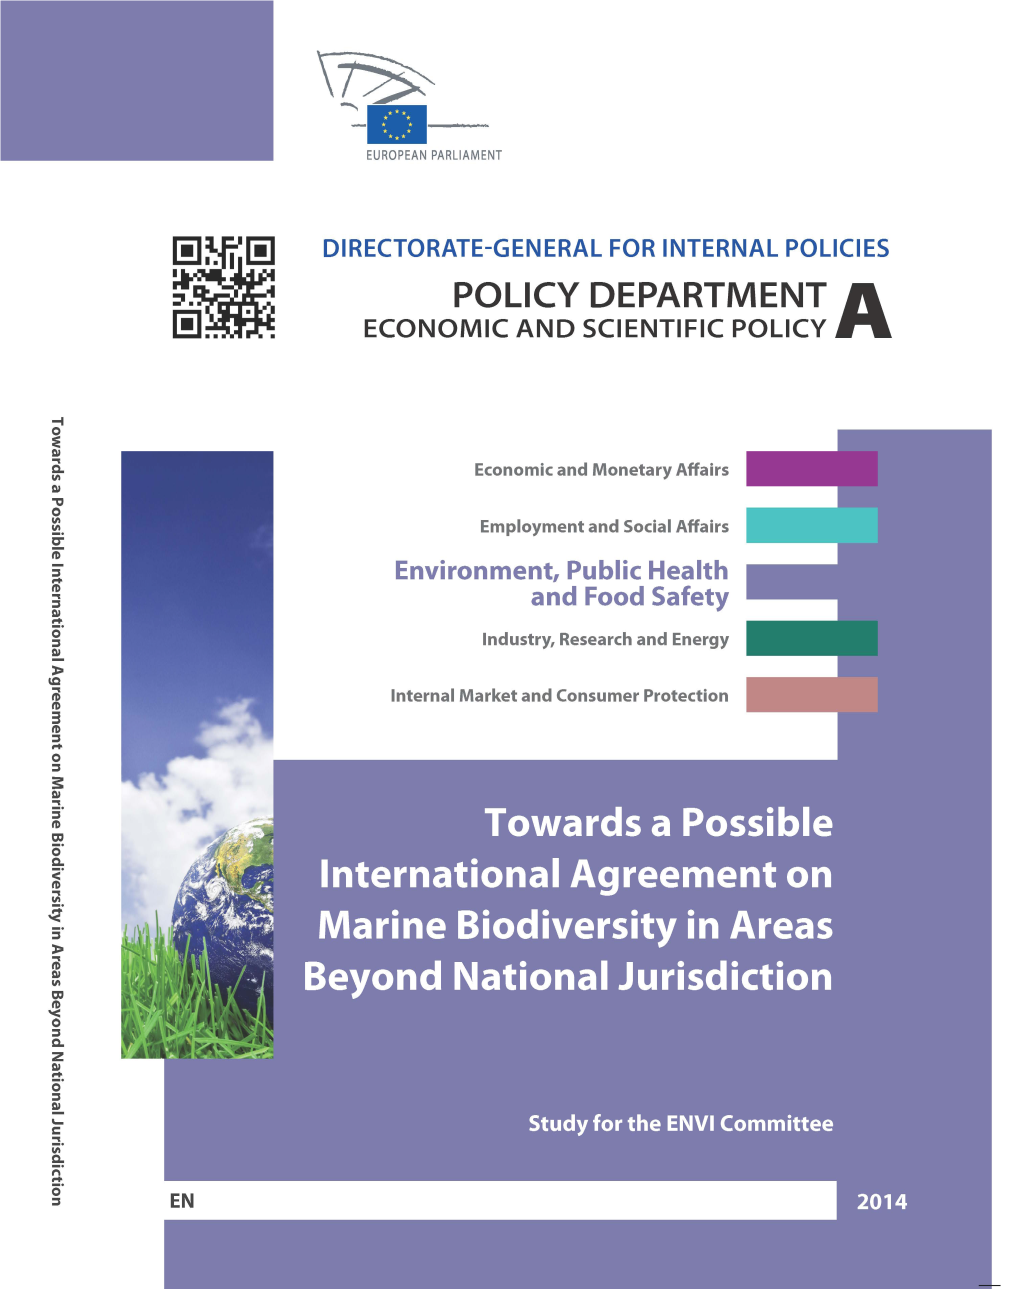 Towards a Possible International Agreement on Marine Biodiversity in Areas Beyond National Jurisdiction